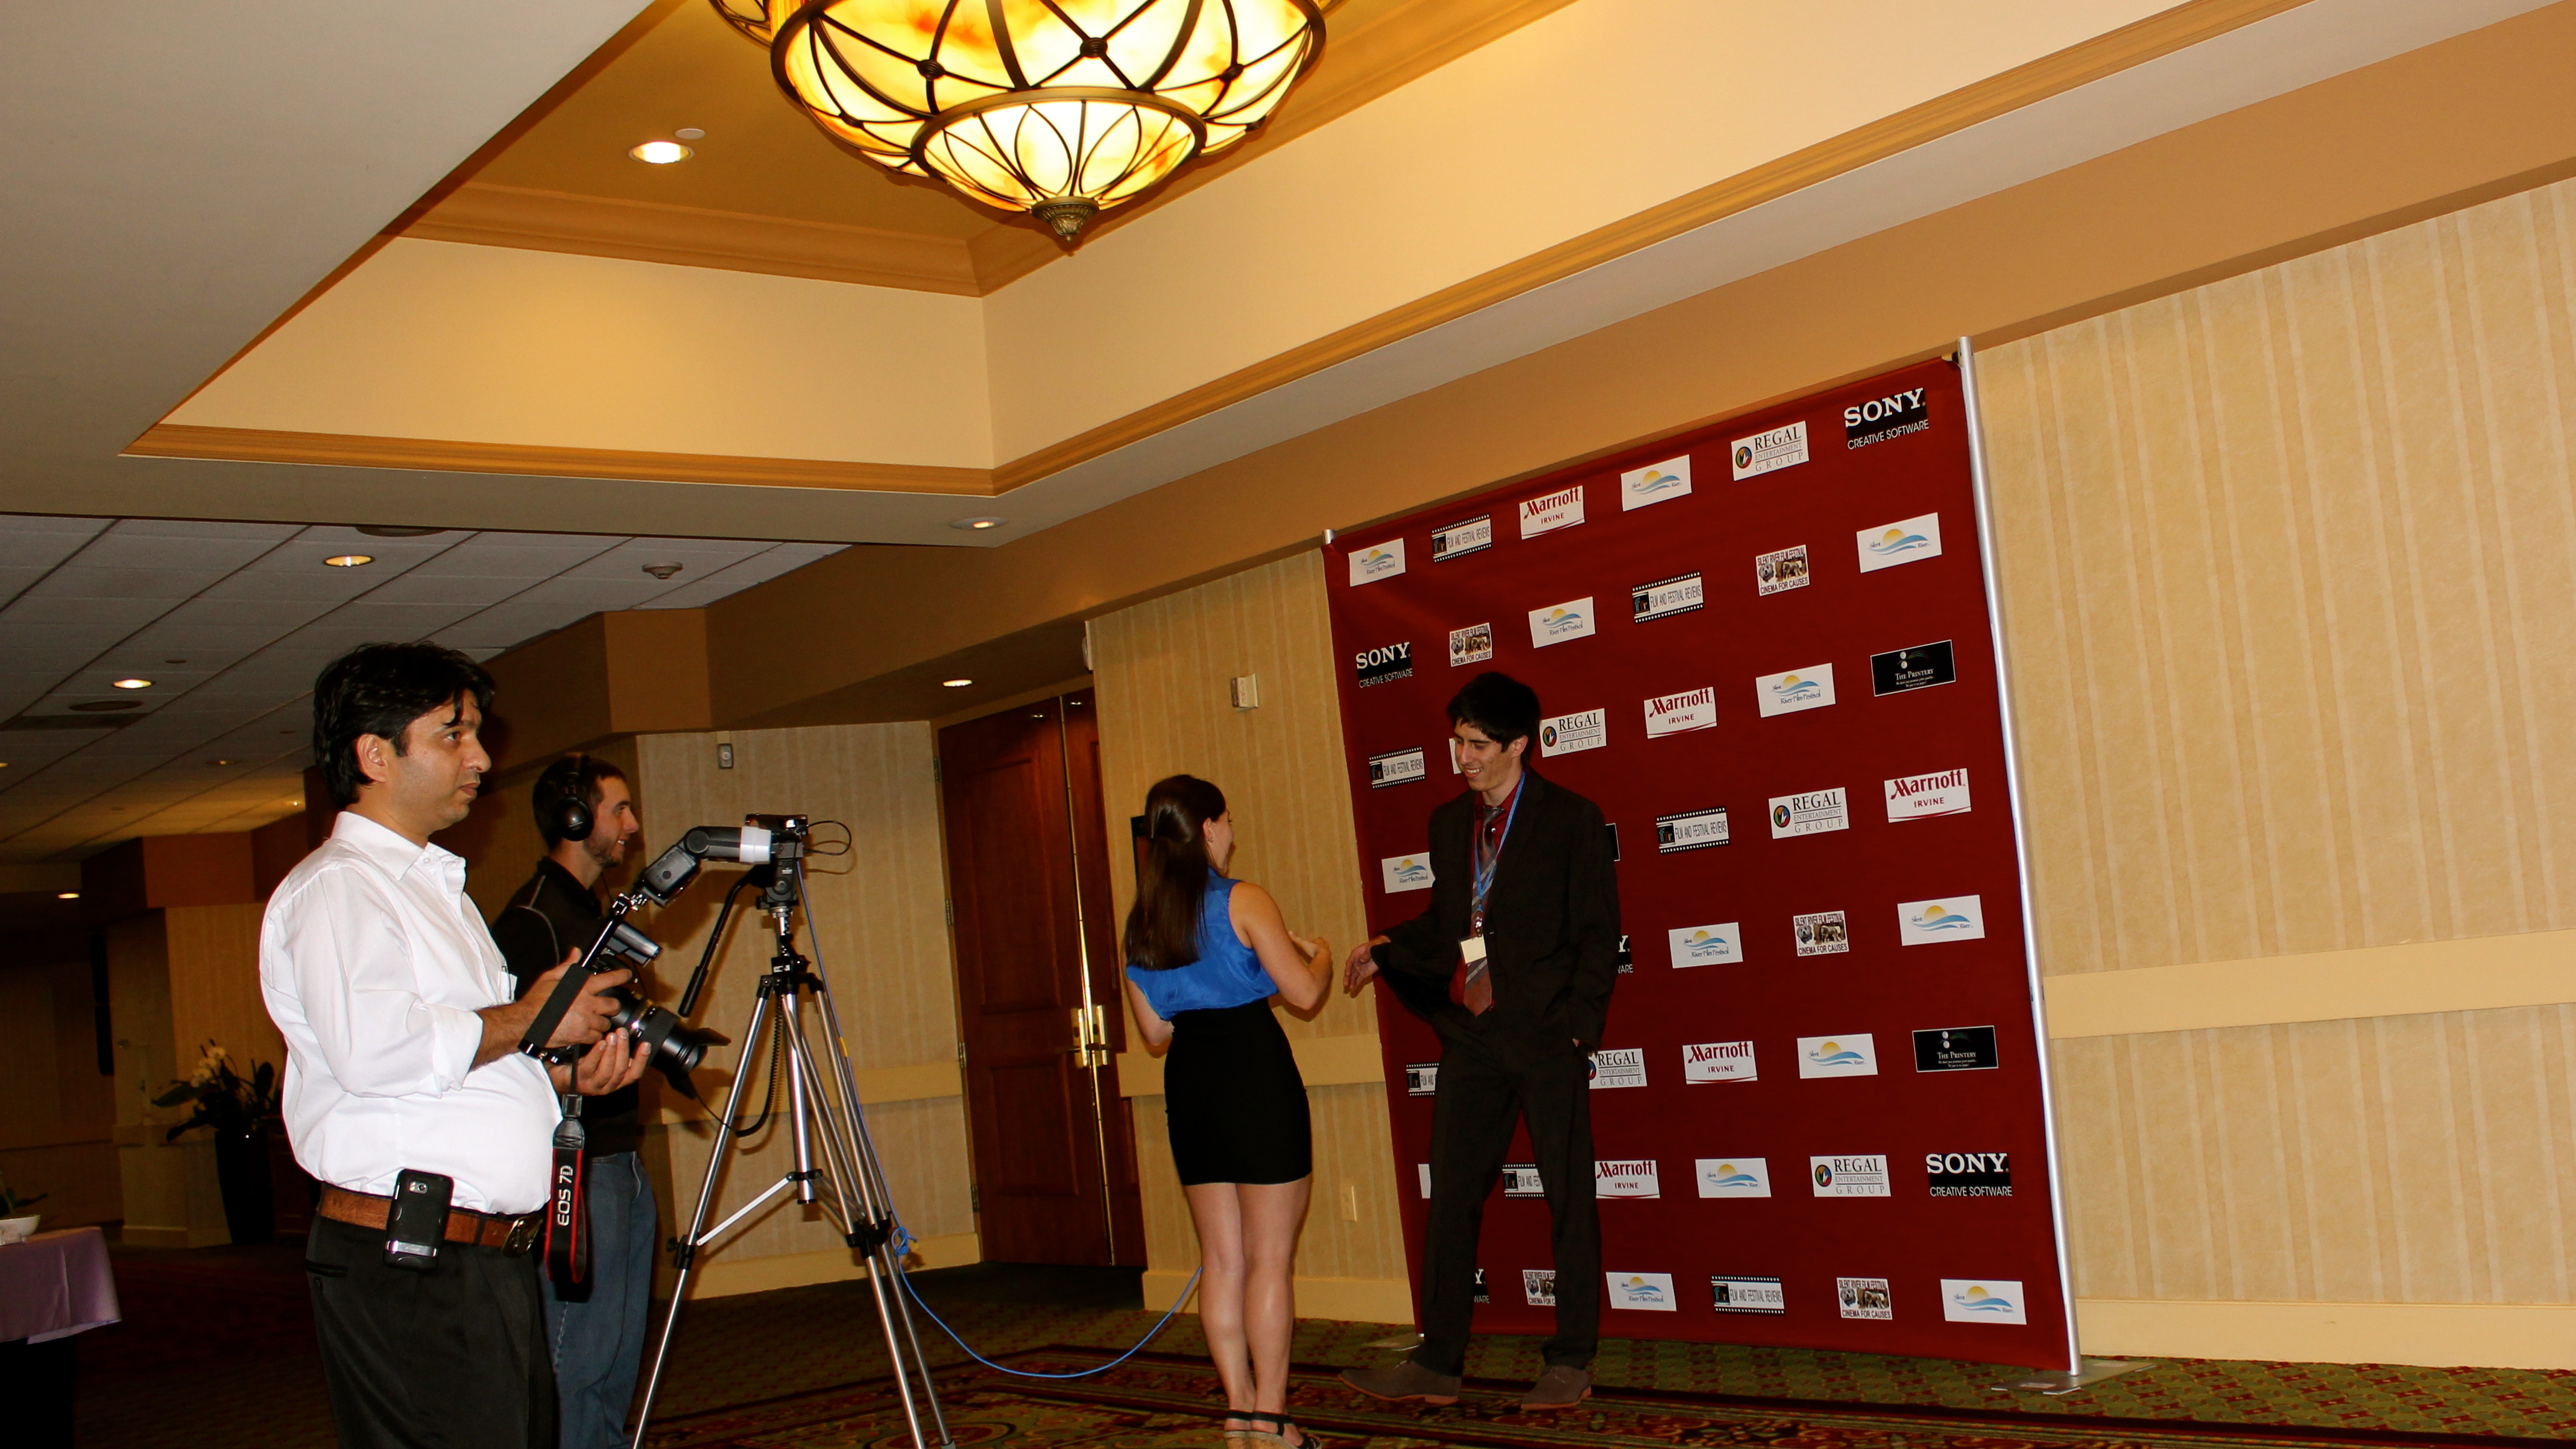 Addison Sandoval being interviewed at the 2012 Silent River International Film Festival.